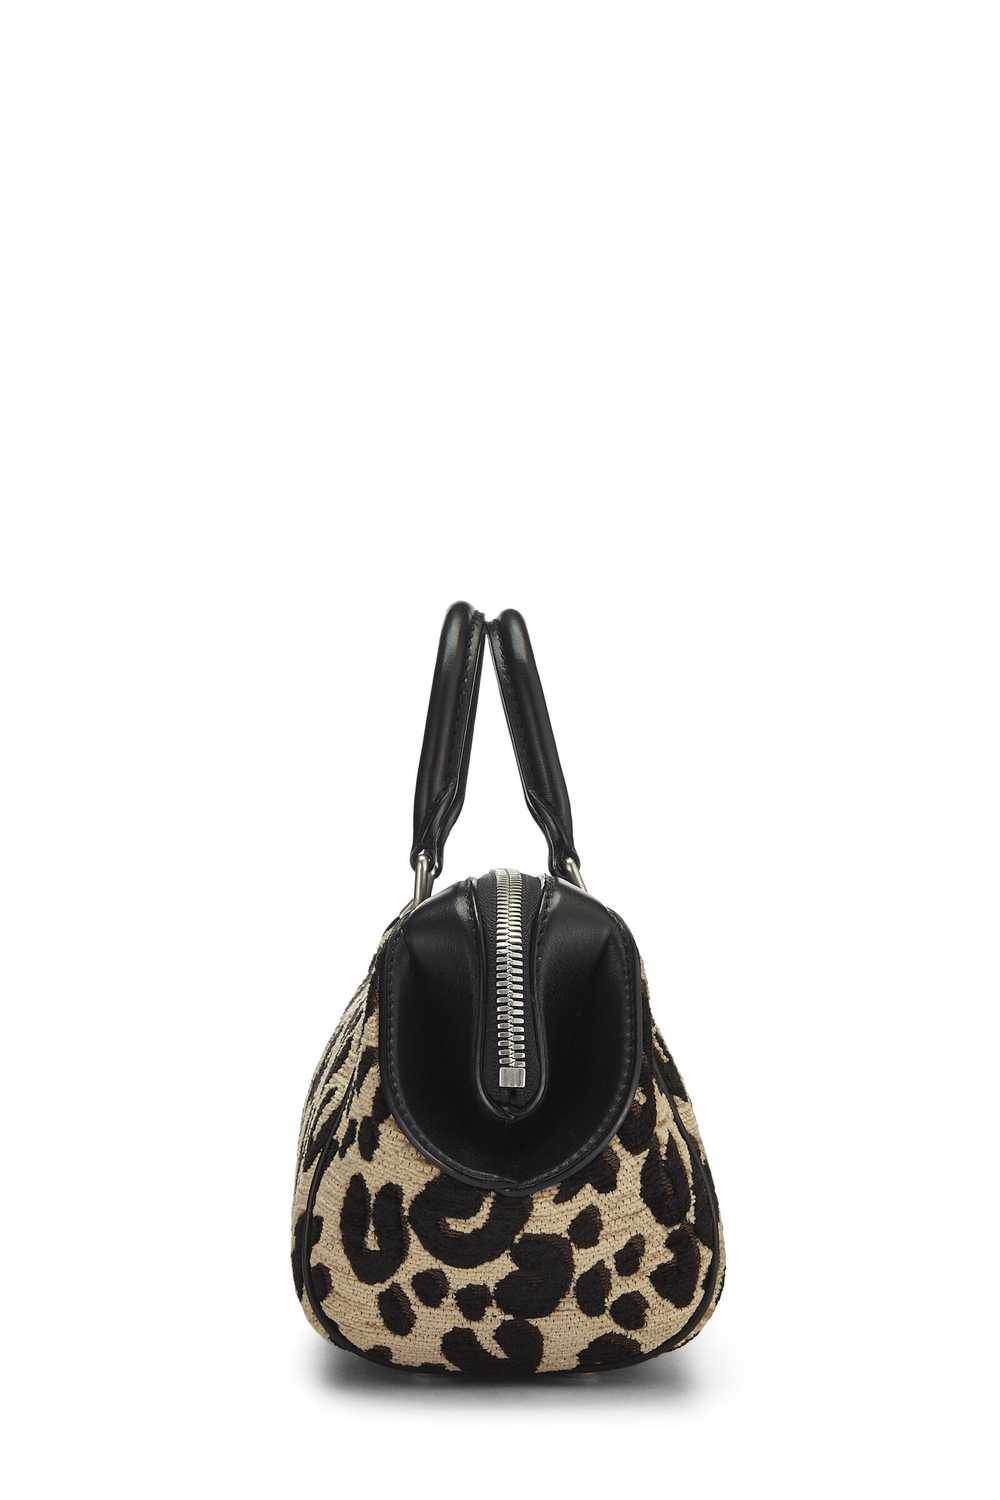 Stephen Sprouse x Louis Vuitton Leopard Baby - image 3